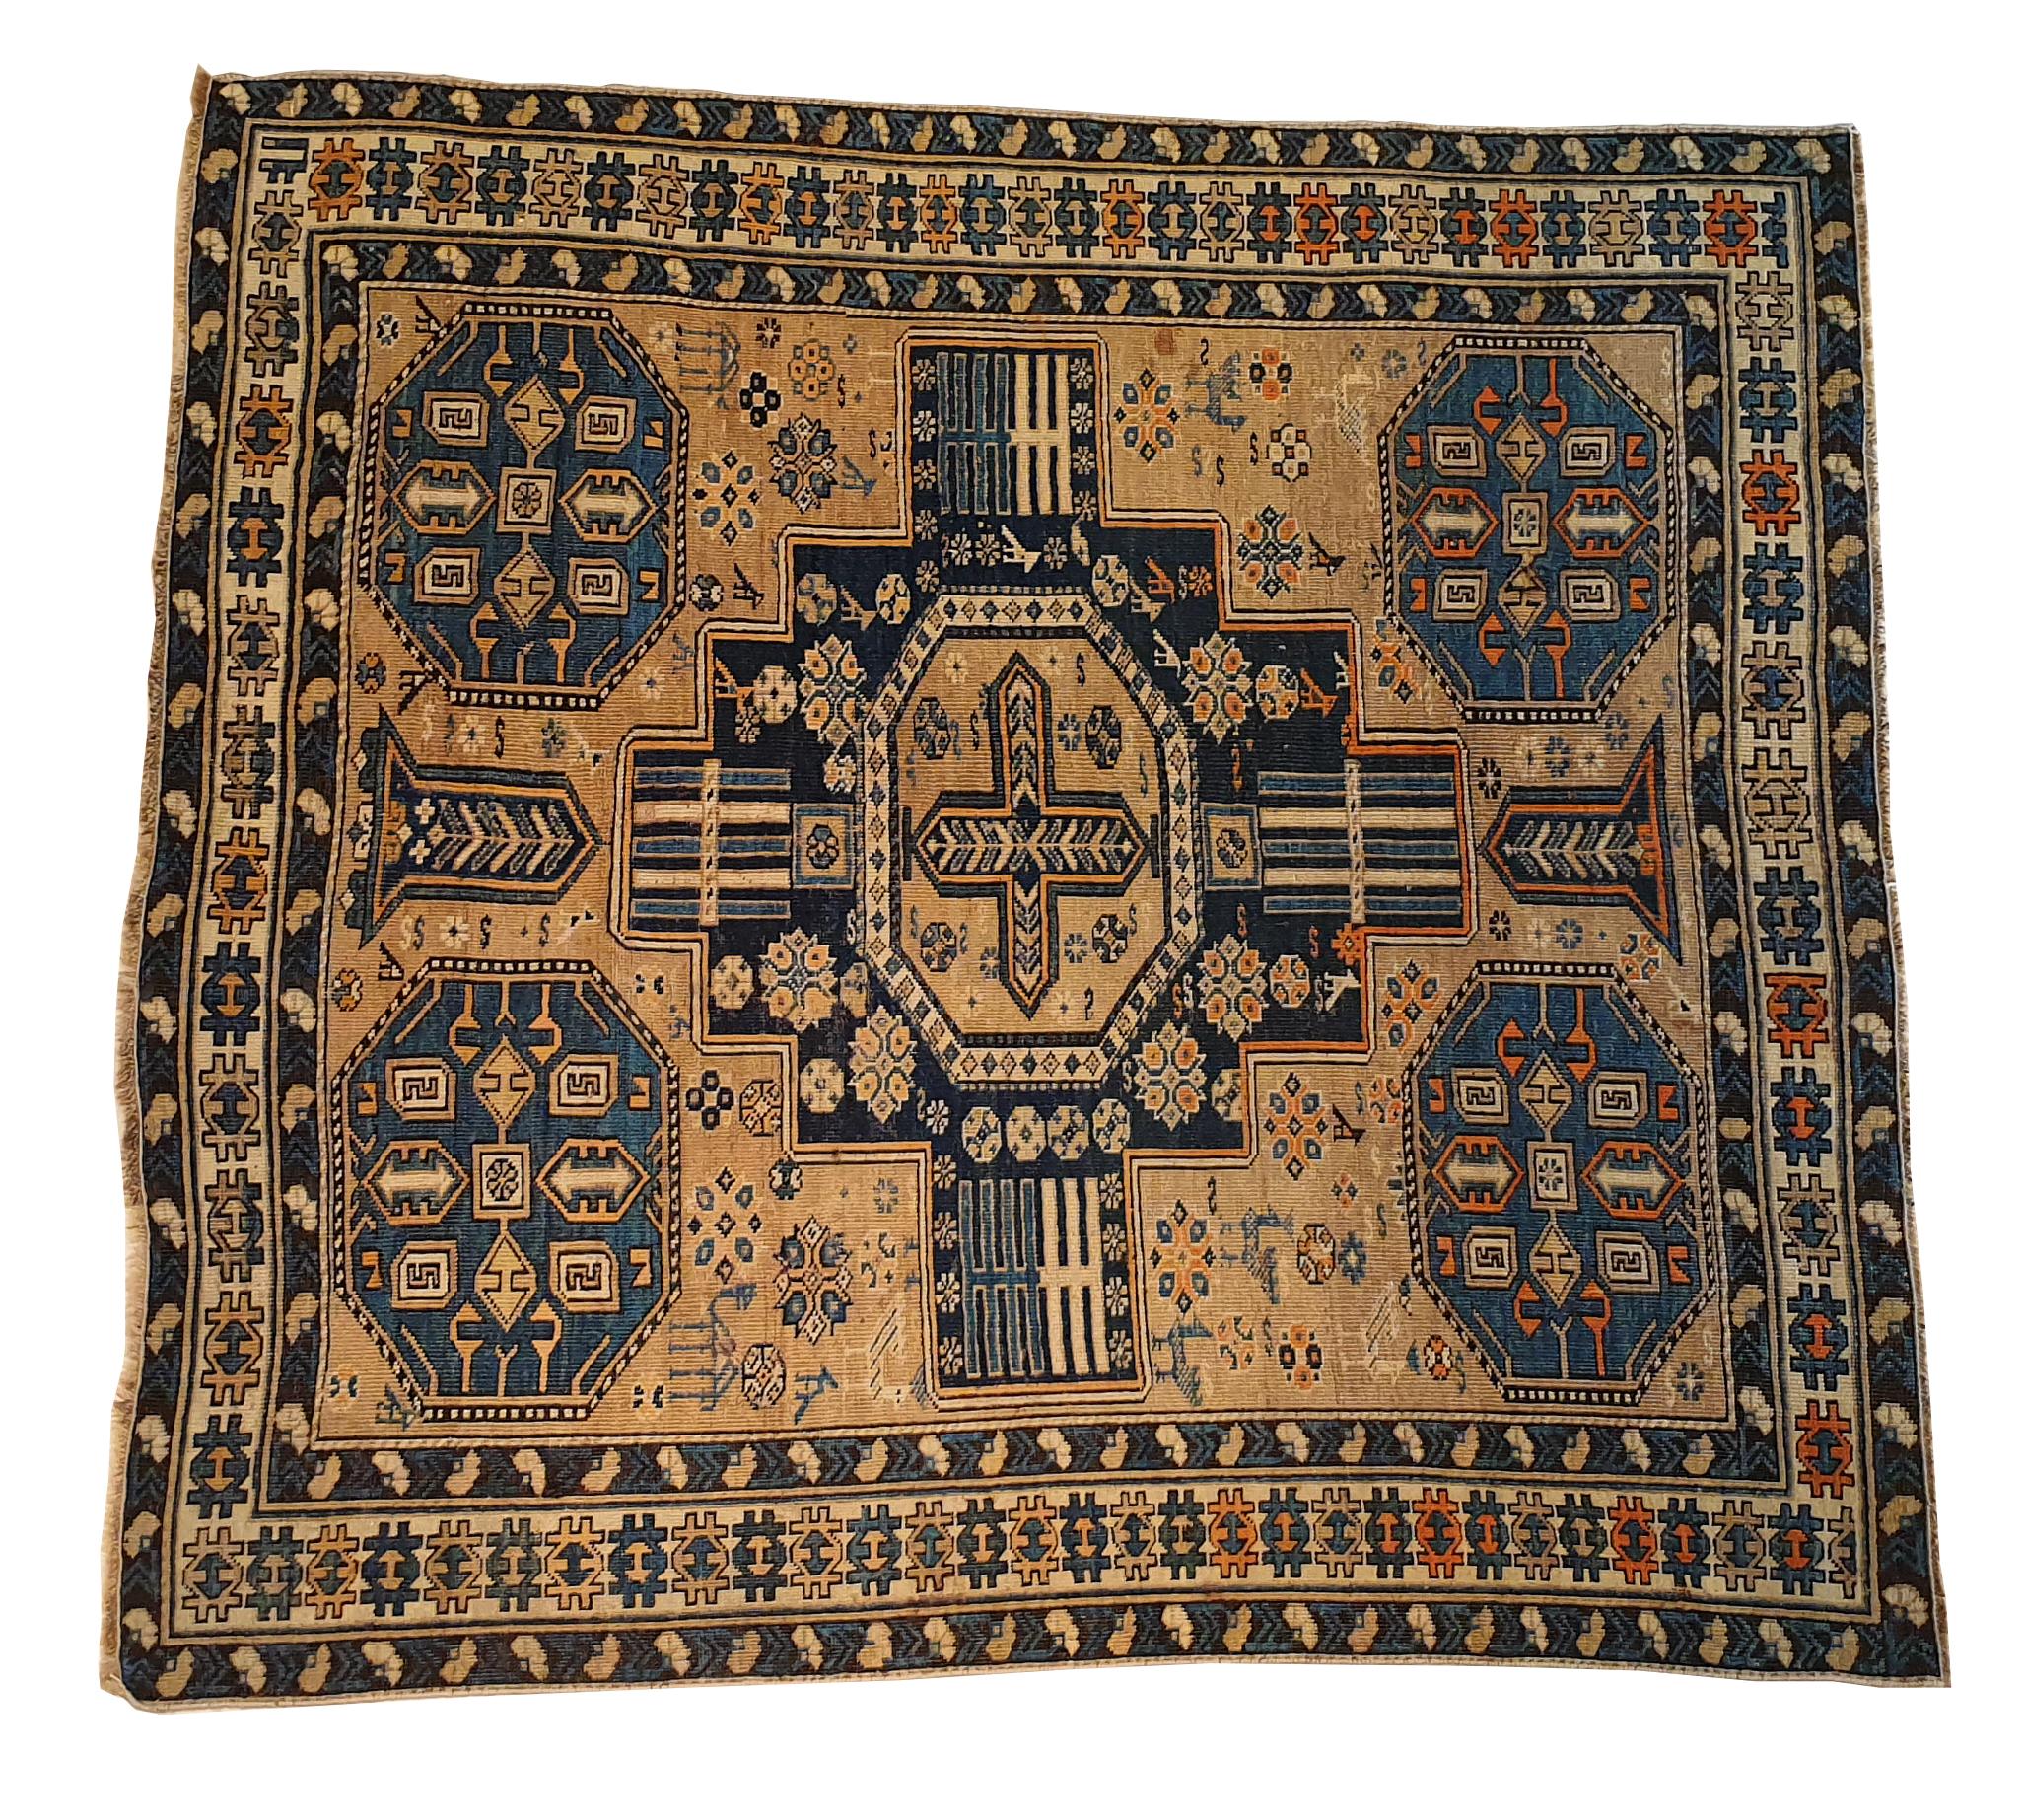 637 - beautiful antique Caucasian carpet with a nice design and beautiful colors, fully and finely hand knotted with wool pile on a wool foundation.